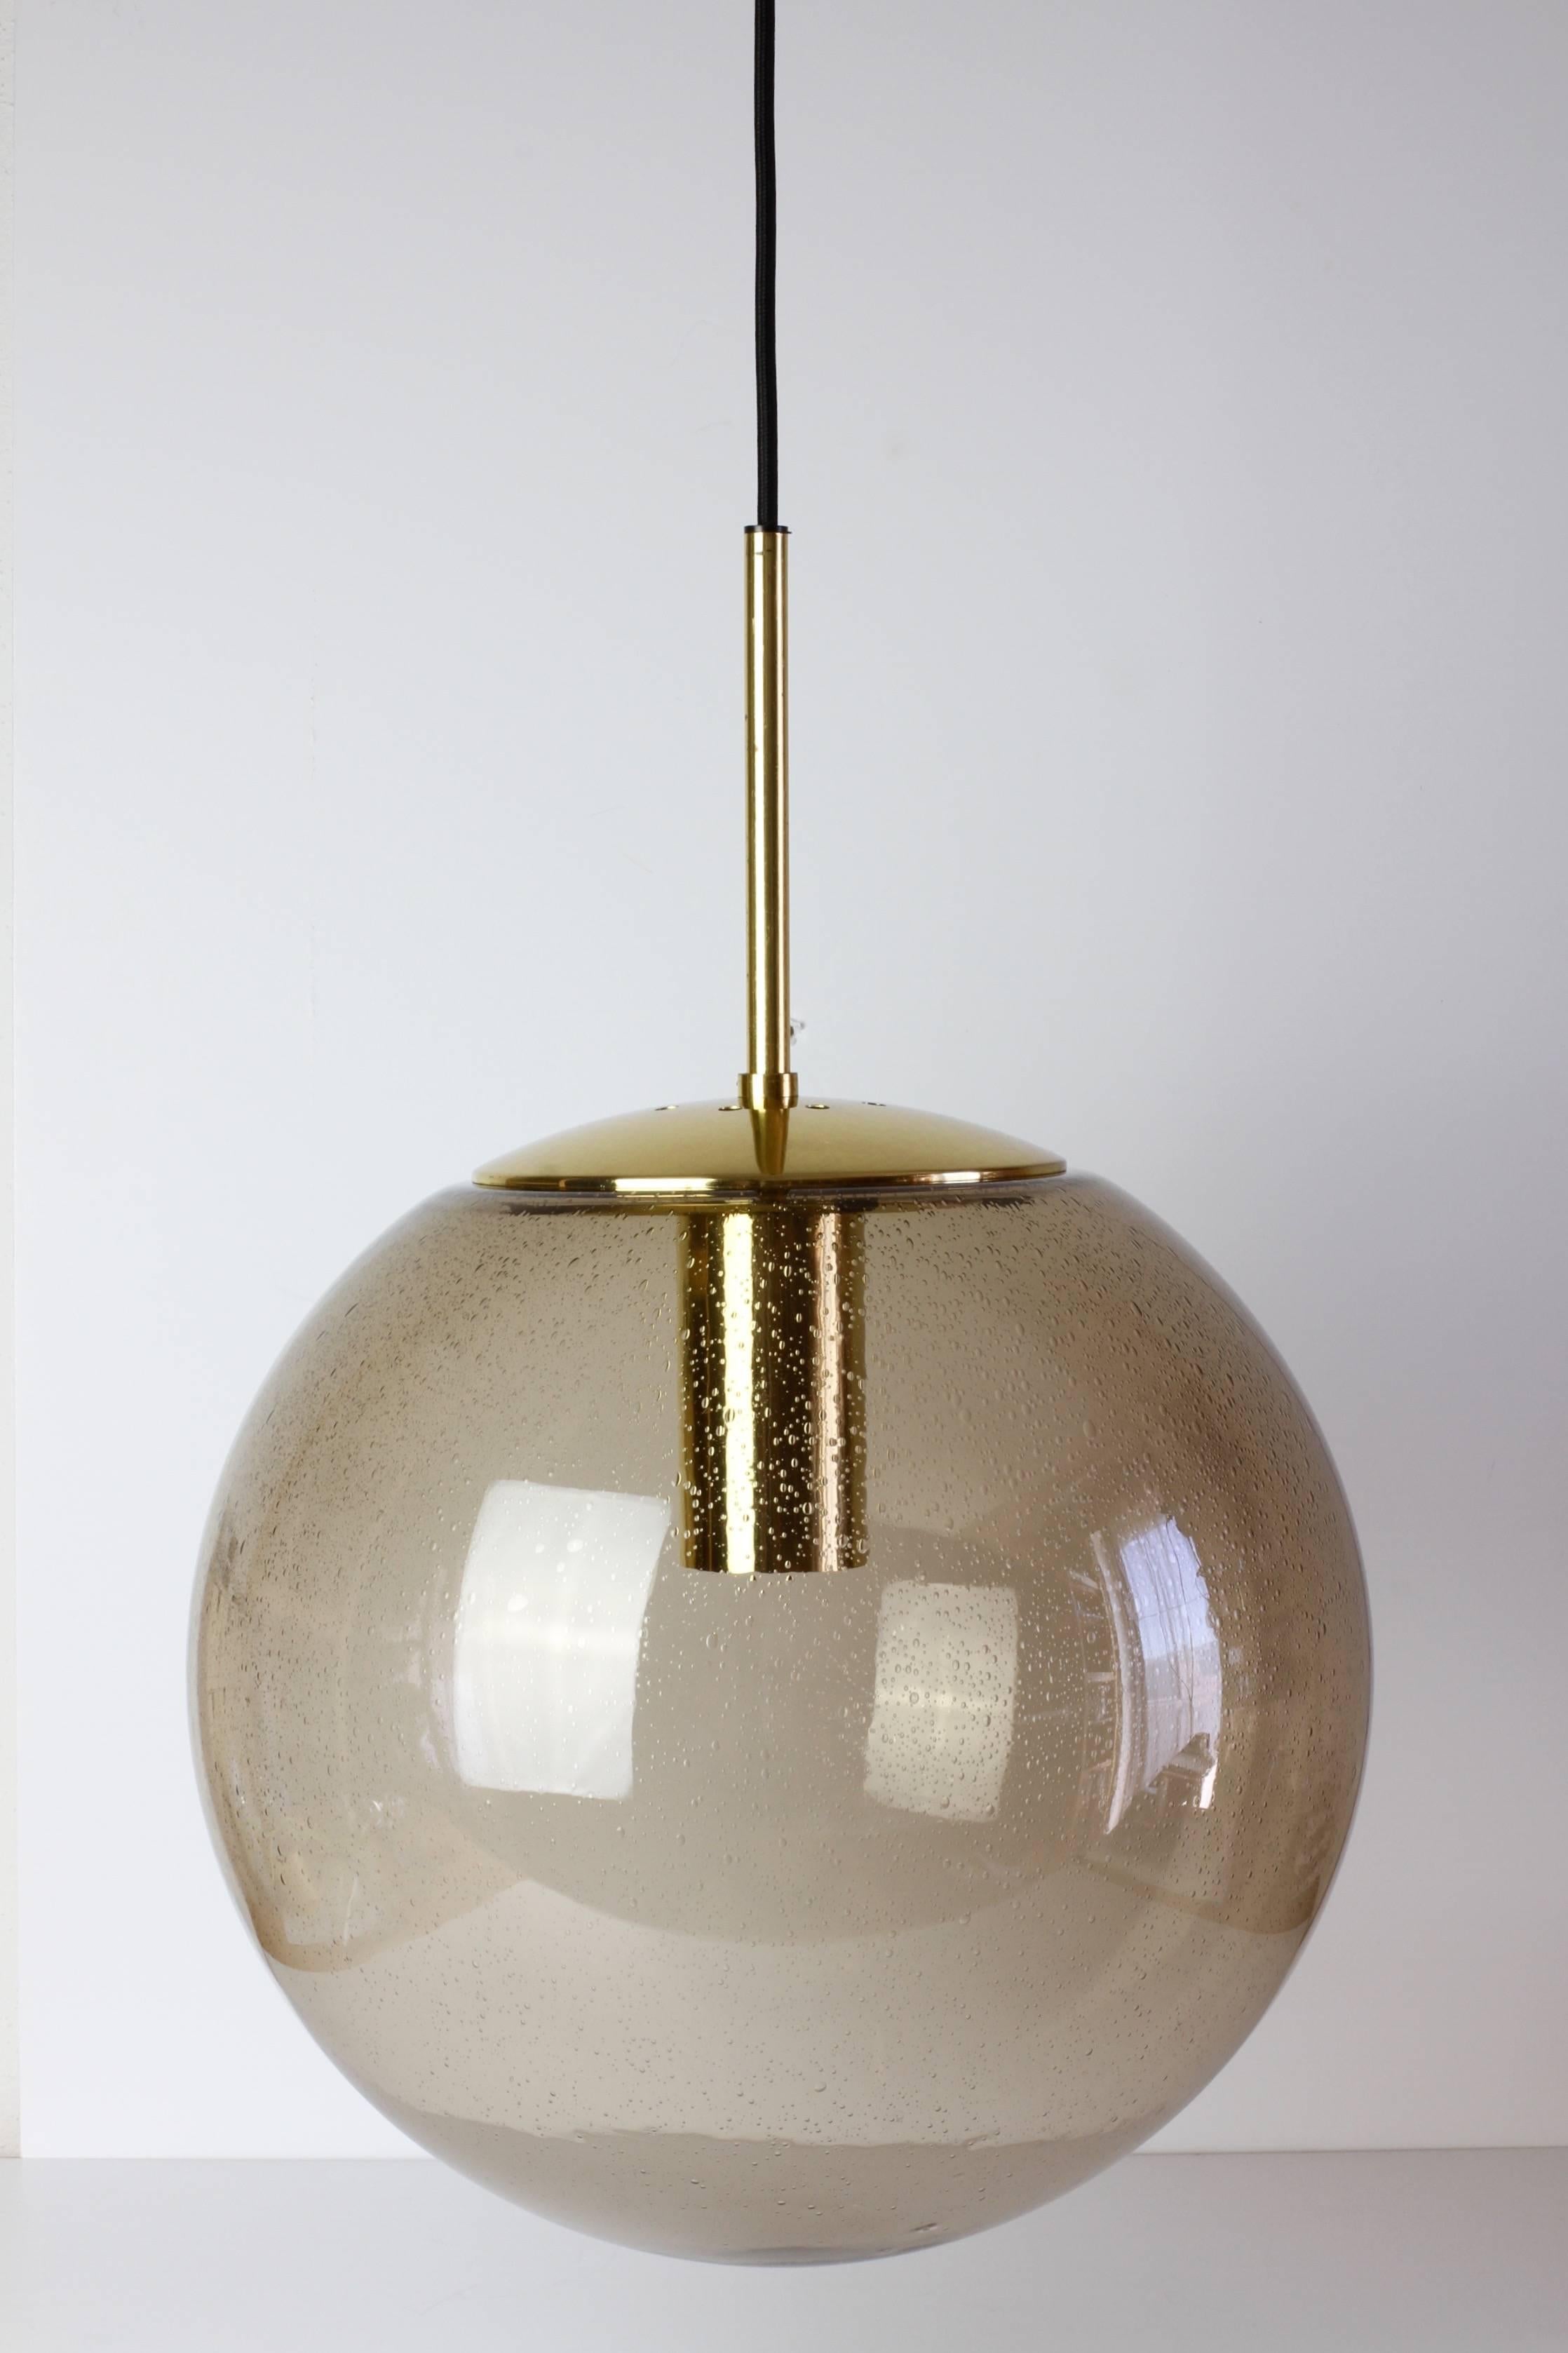 Large Mid-Century hanging pendant lights by Glashütte Limburg. Made in the late 1960s throughout to the late 1970s, this gorgeous light features a mouth blown smoked glass globe containing many tiny bubbles resembling water droplets. 

All hardware